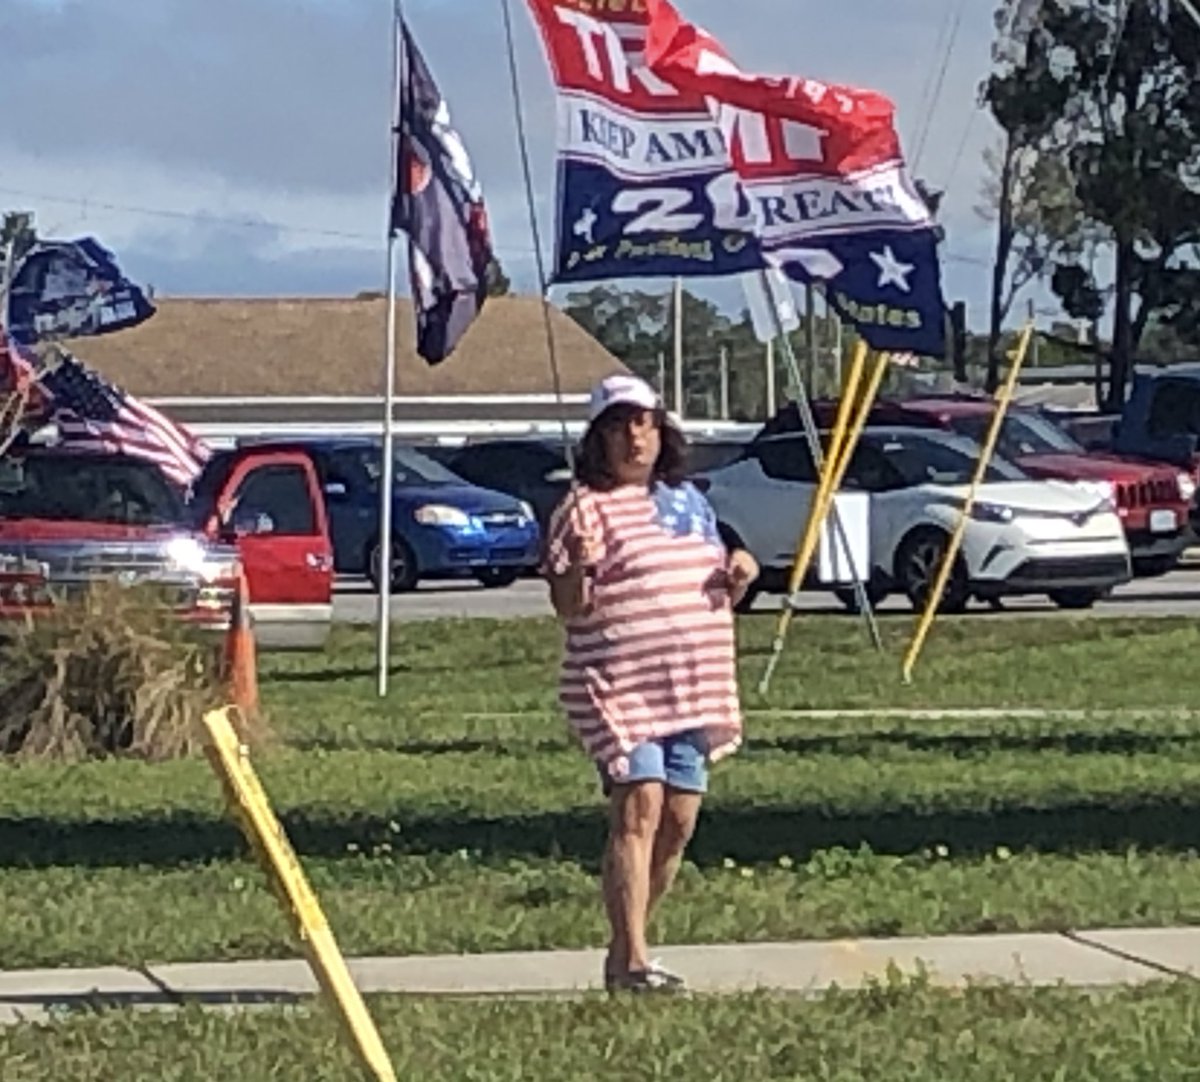 Just drove past a mini Trump rally where a bunch of idiots were dancing to shitty dance music and an old white lady pulled up next to me, rolled down her window and I expected the worst but she screamed “HE LOST MOTHERFUCKERS!”